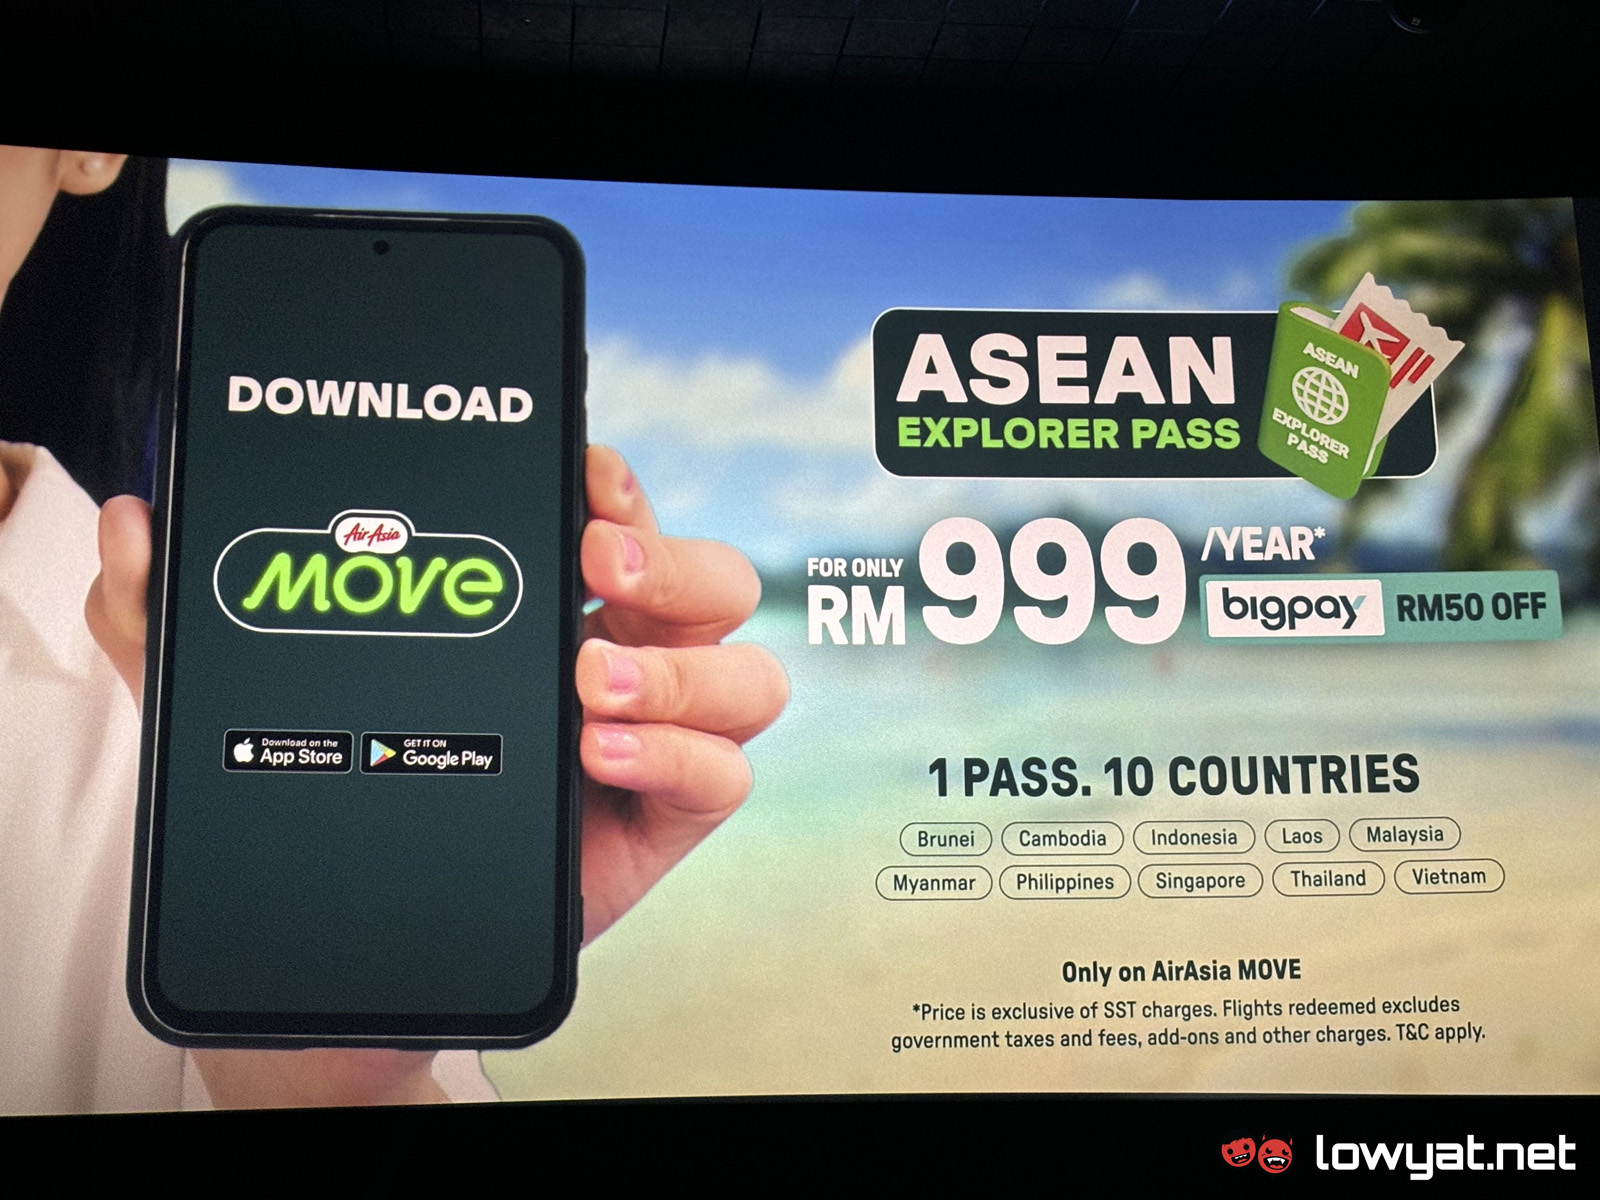 AirAsia Introduces New ASEAN Explorer Pass That Costs RM1,188